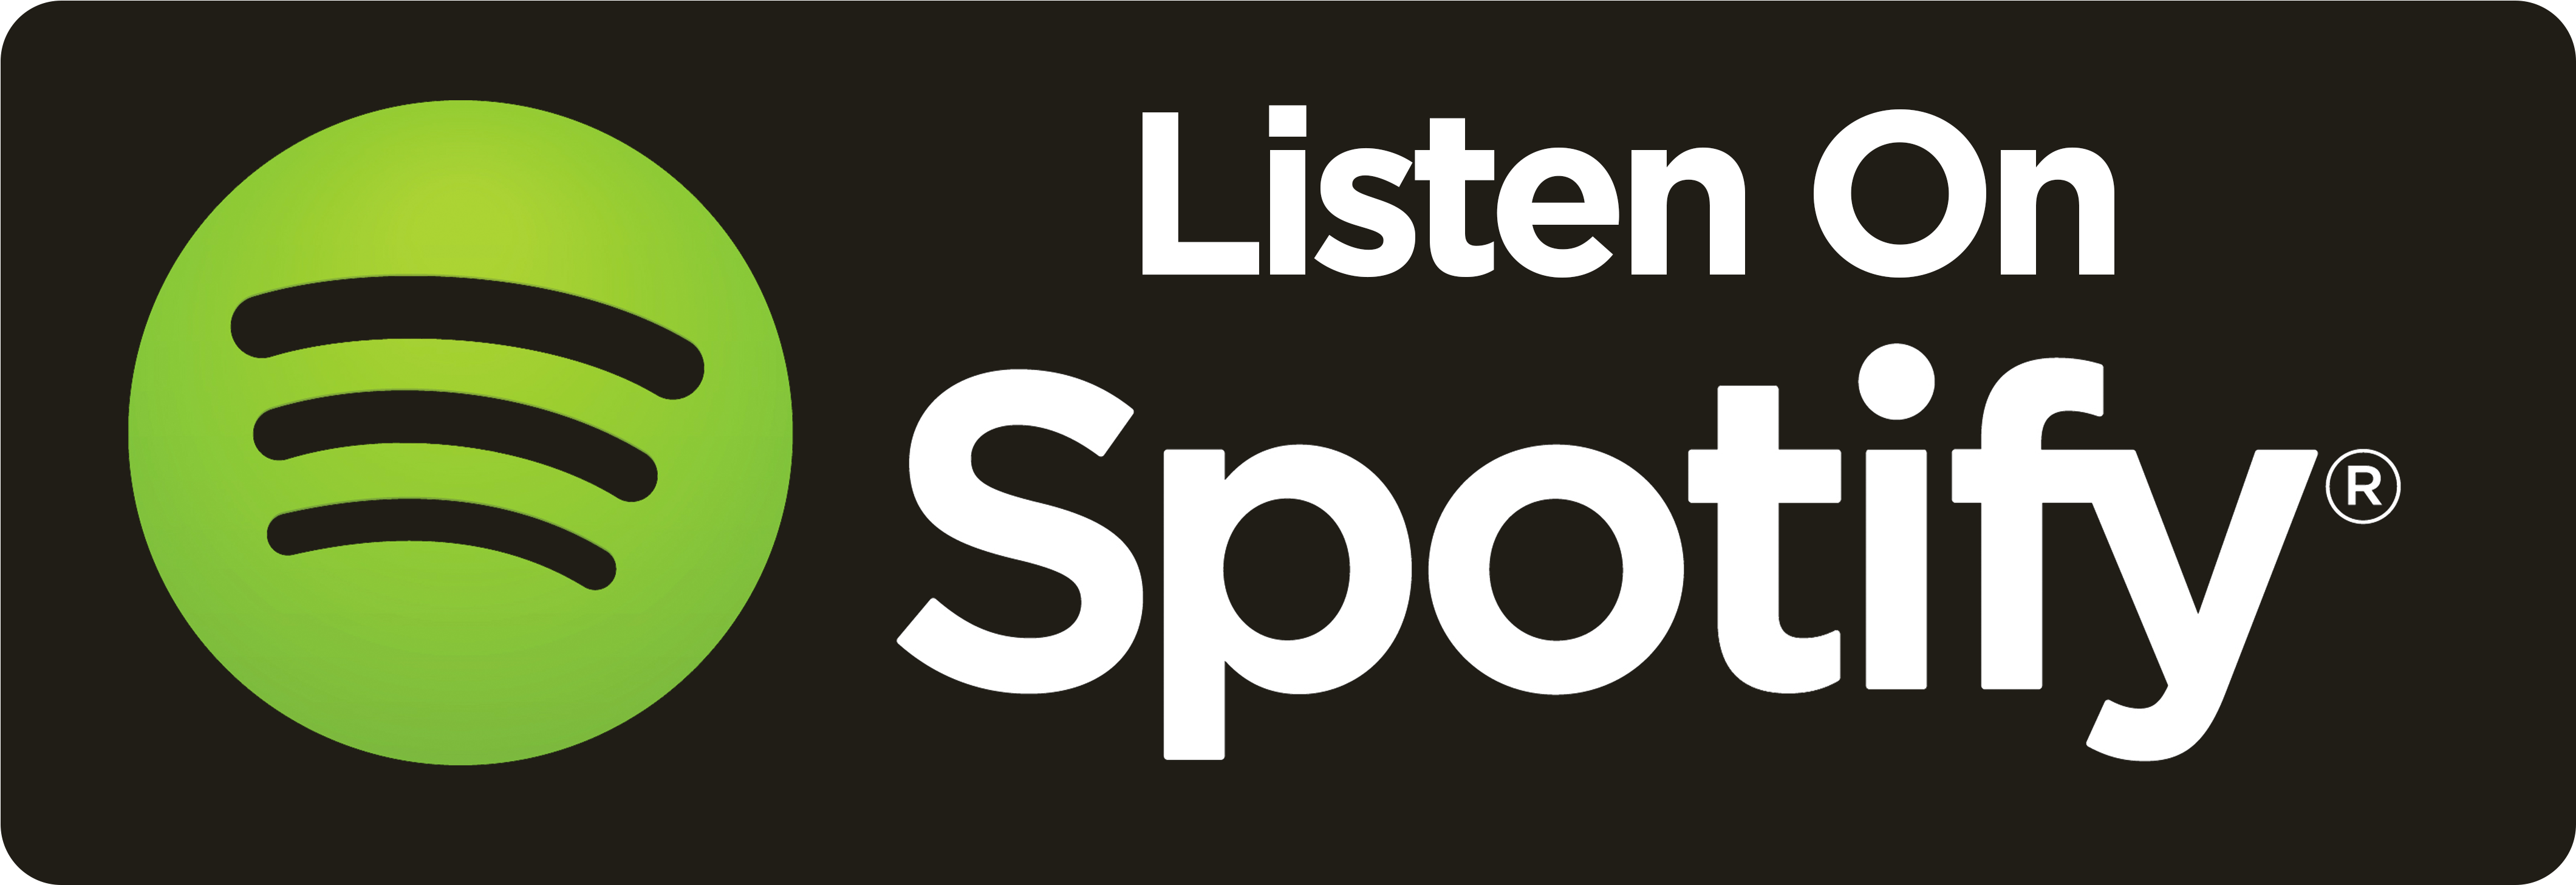 Download Spotify Logo Now Streaming On Spotify Png Image With No Background Pngkey Com